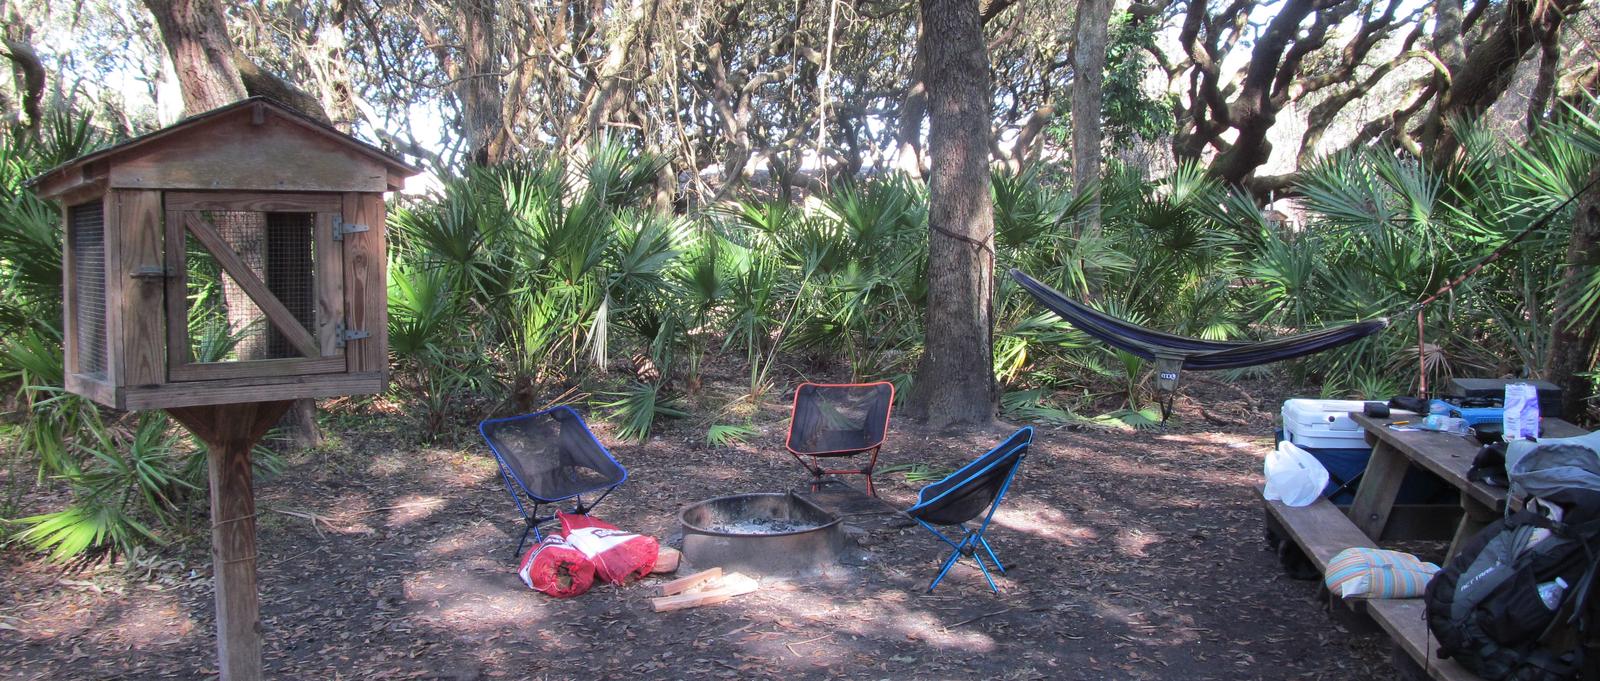 campsite with picnic table, food cage, and fire ring under live oak treesSea Camp site 14